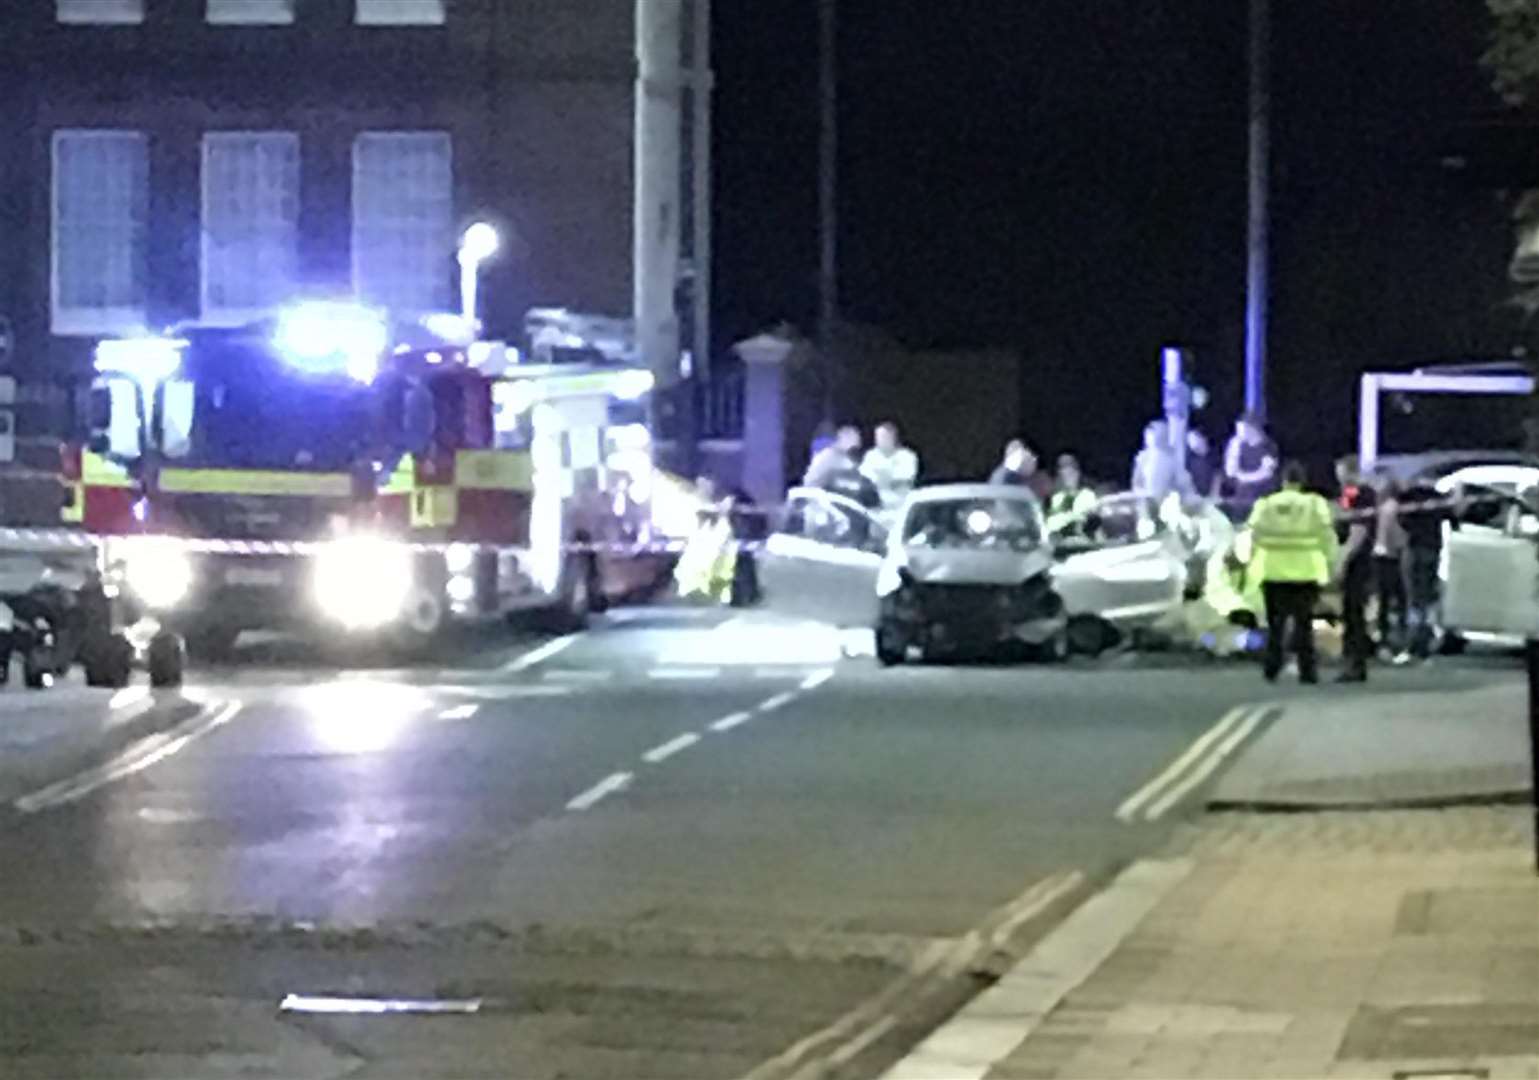 A woman was arrested on suspicion of drink-driving after crash in Corporation Street, Rochester